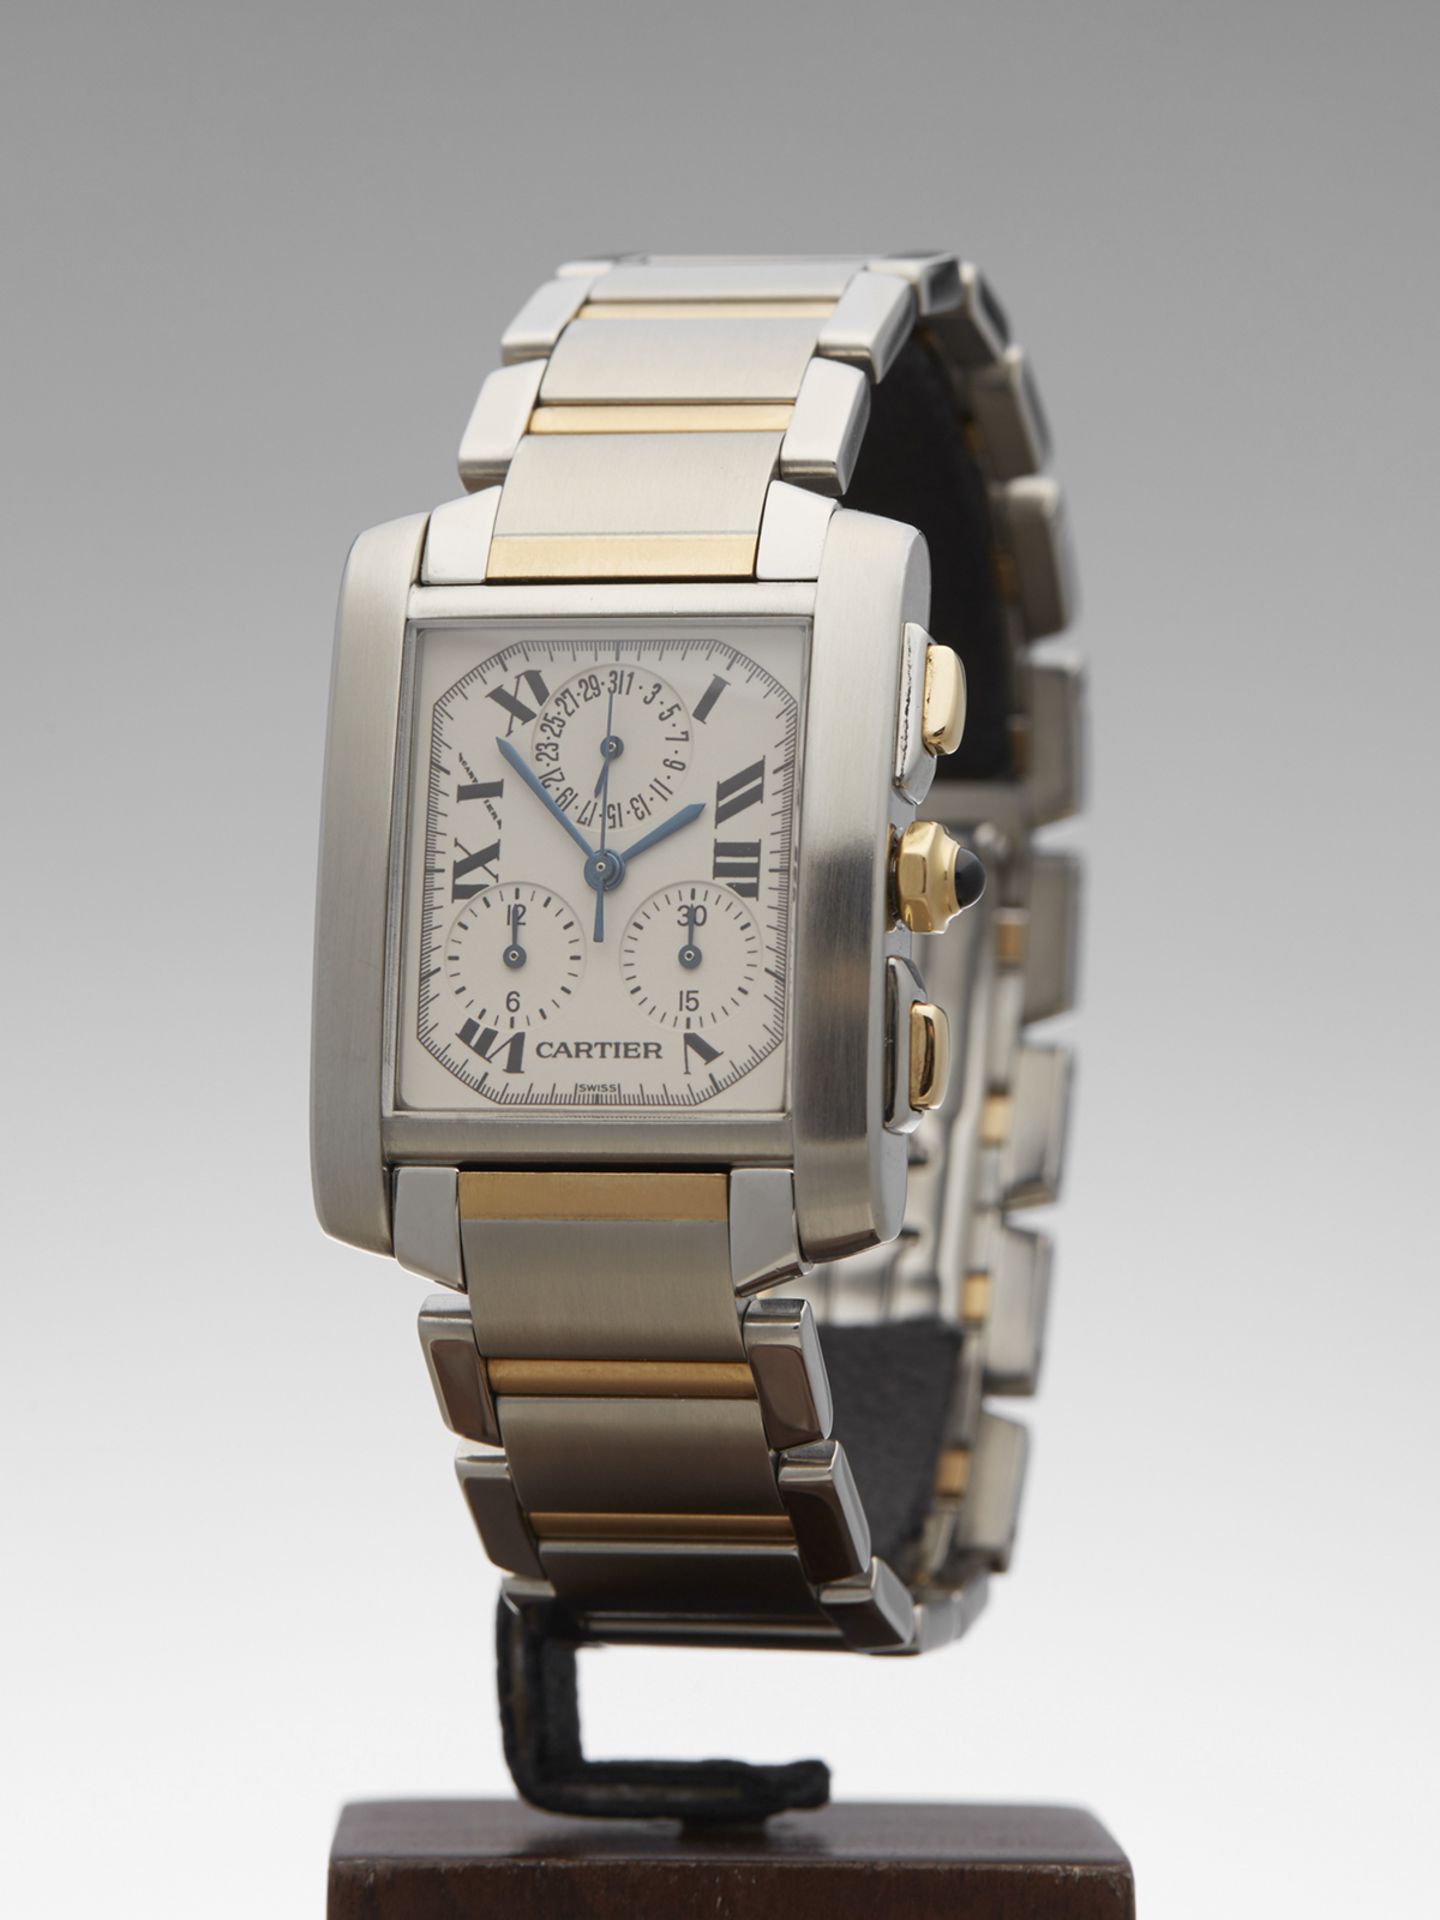 Cartier Tank Francaise Chronoreflex 28mm Stainless Steel & 18k Yellow Gold 2303 or W51004Q4 - Image 4 of 10